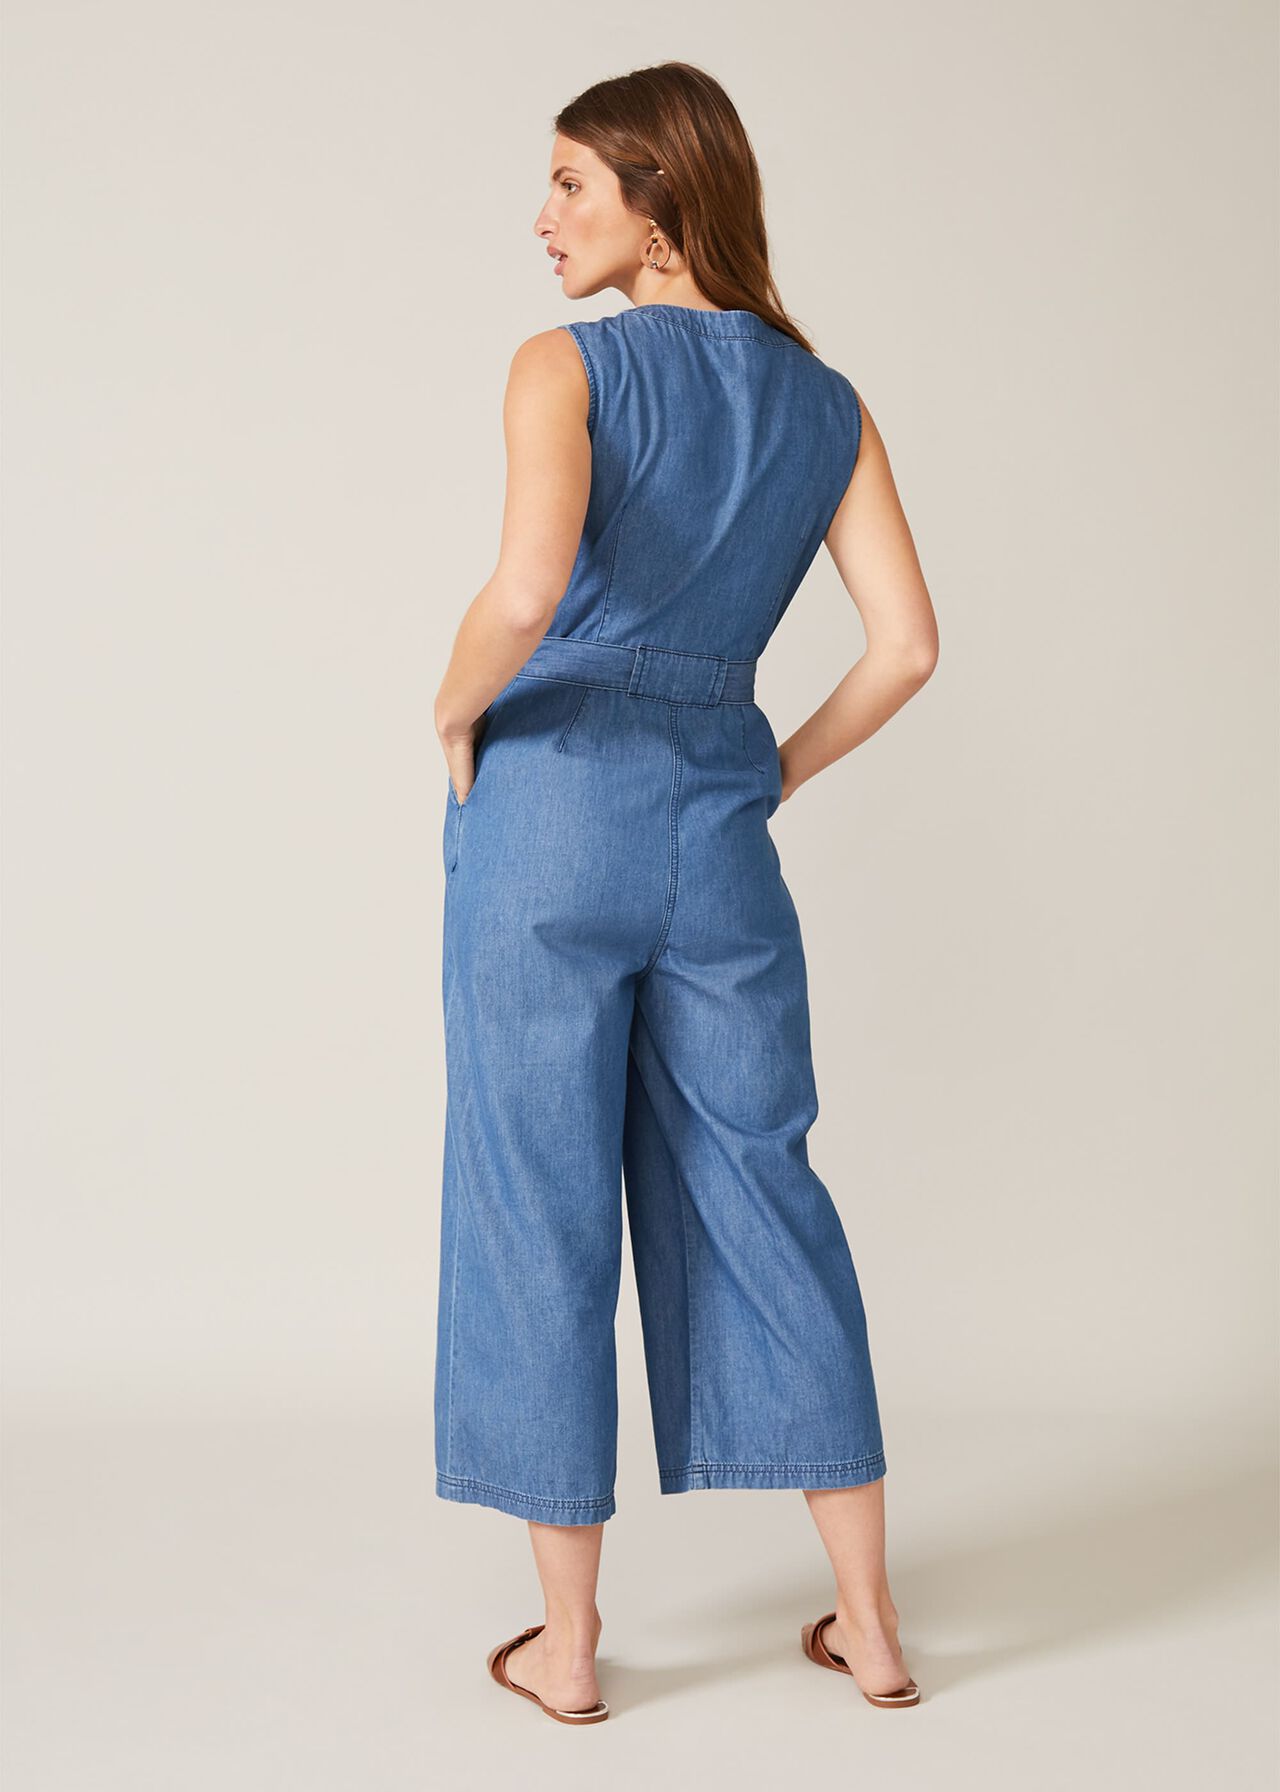 Everly Chambray Cropped Jumpsuit